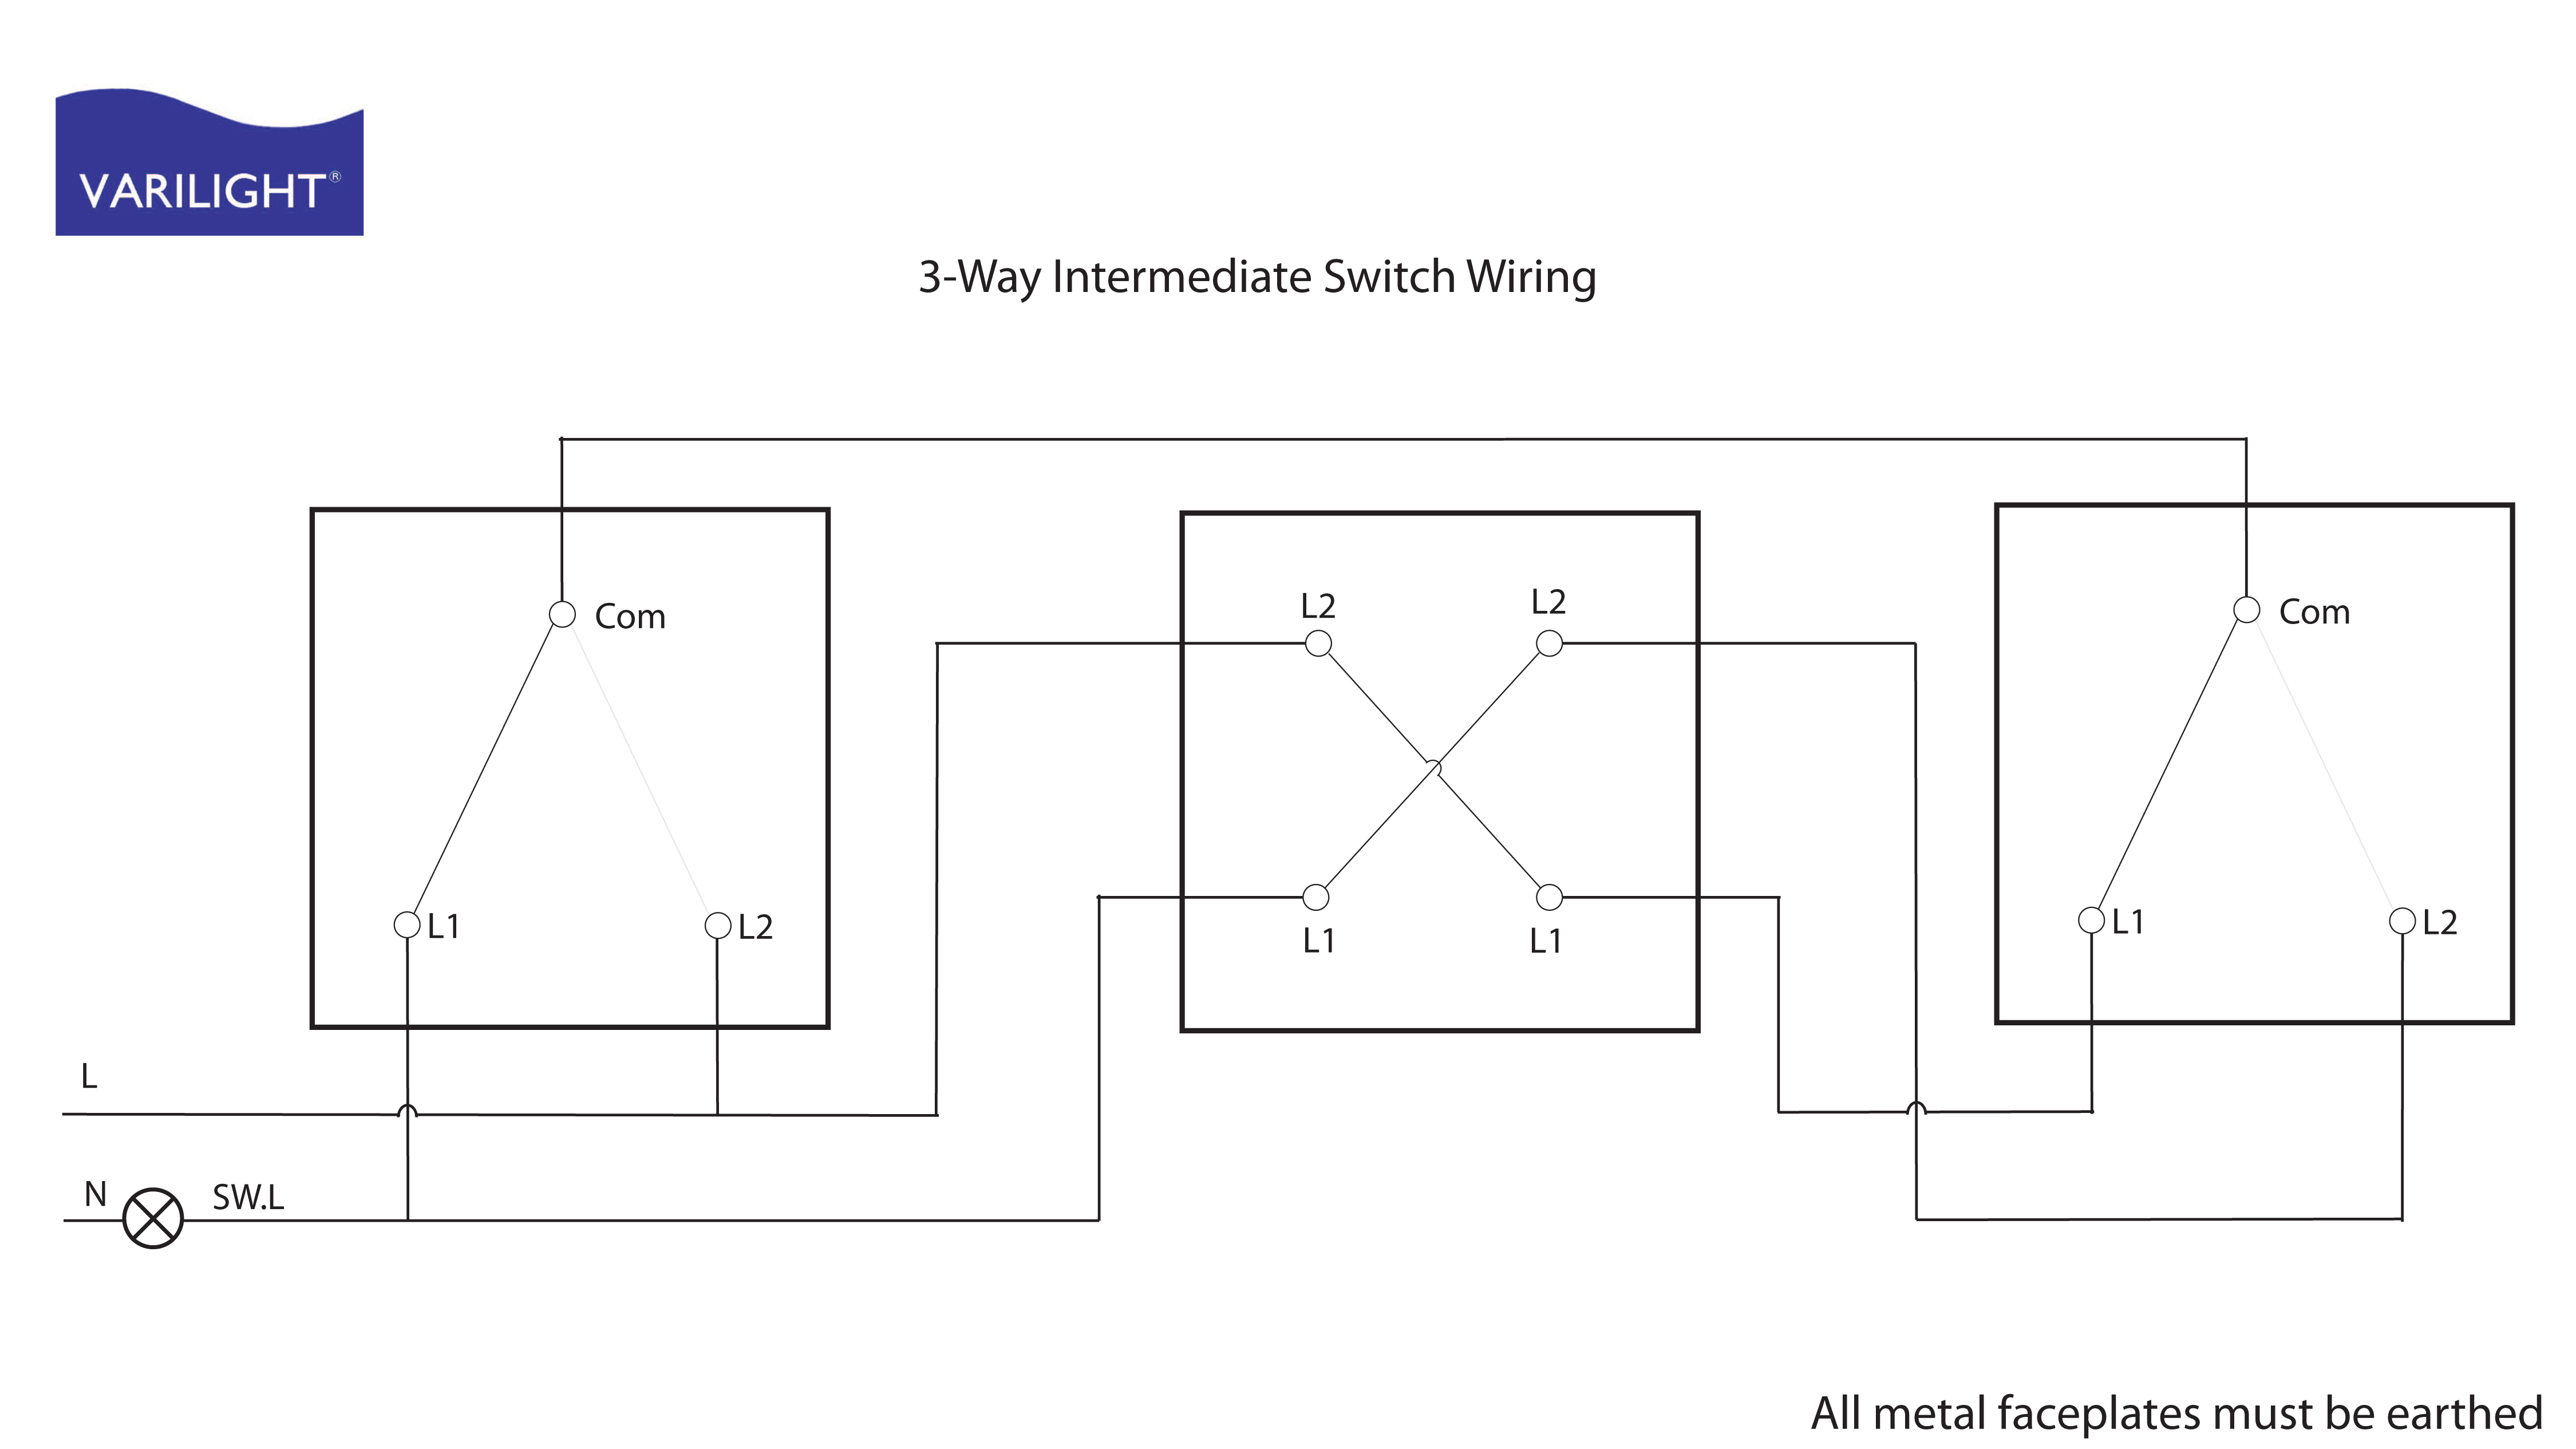 Varilight Wiring Diagrams, 2 Way Switch Wiring With Intermediate